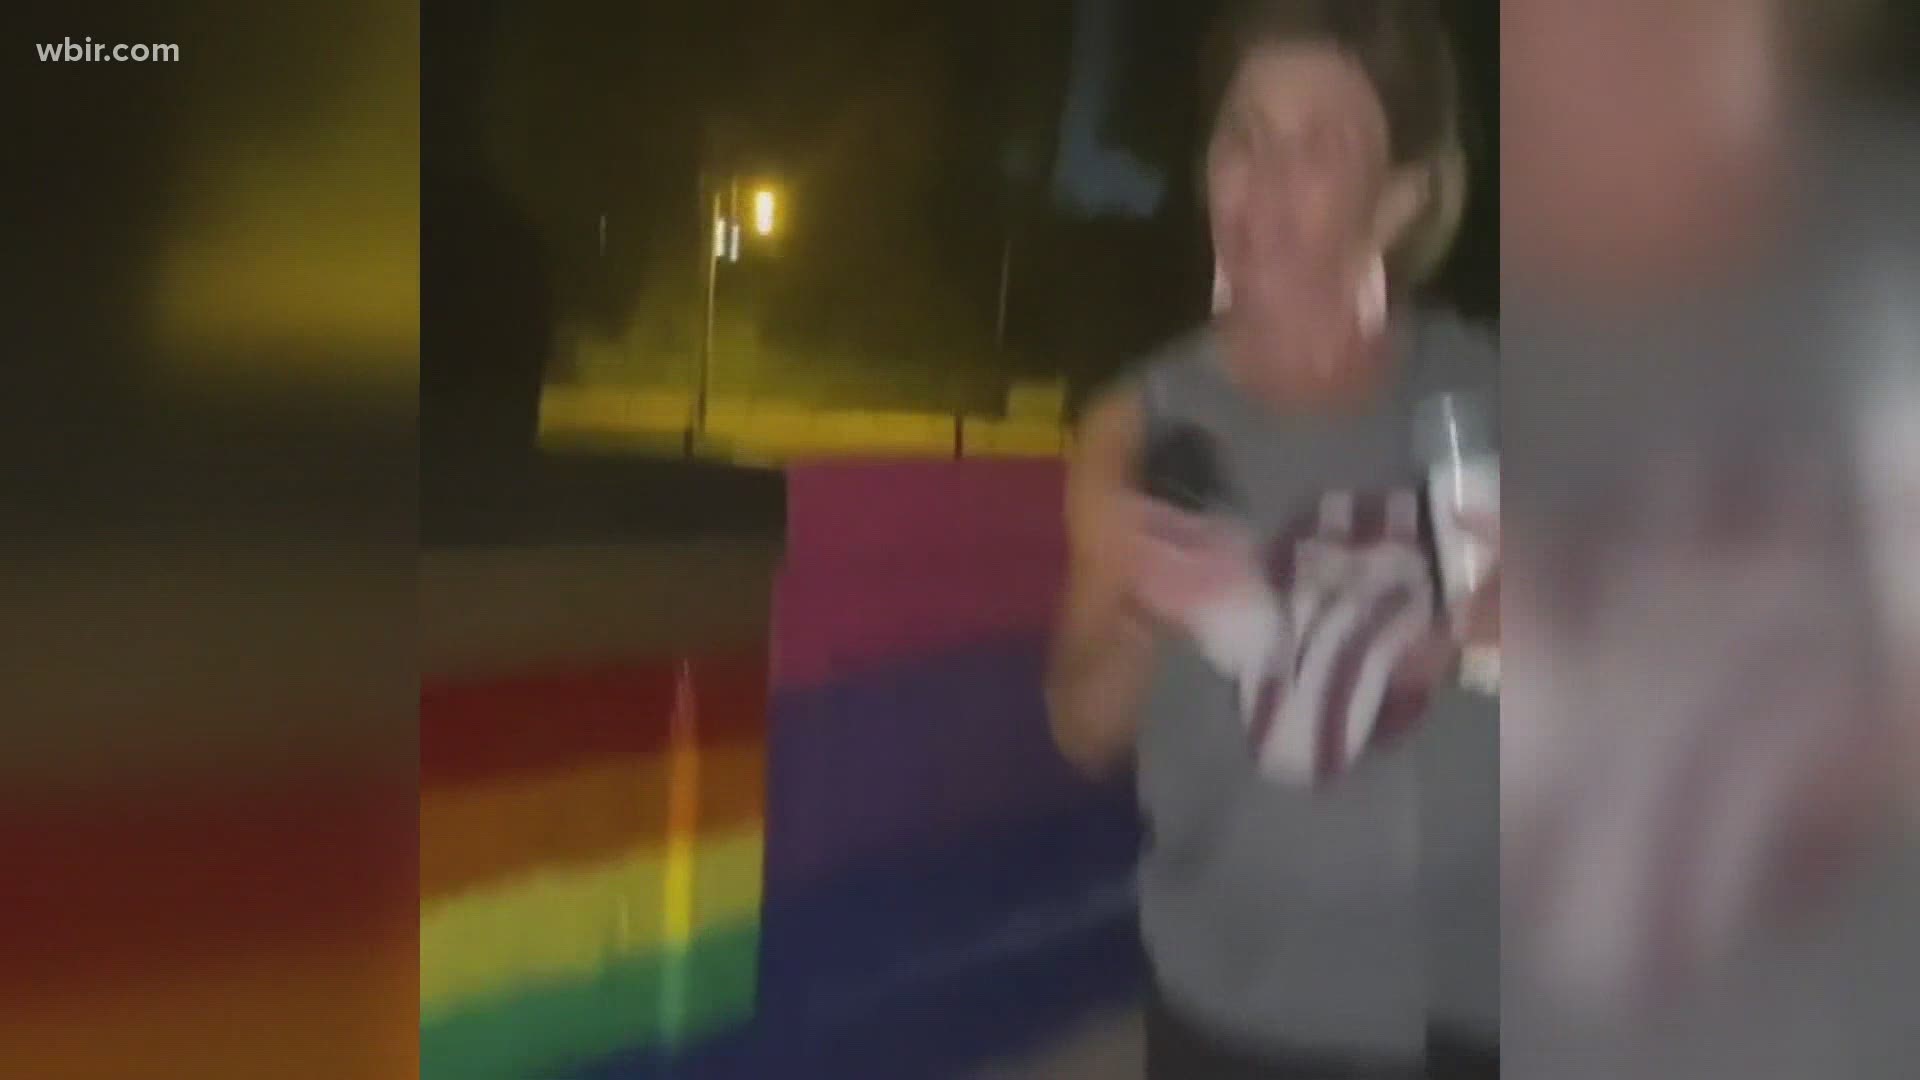 The woman yelling racist and homophobic language at teens in a viral video is now without a job.